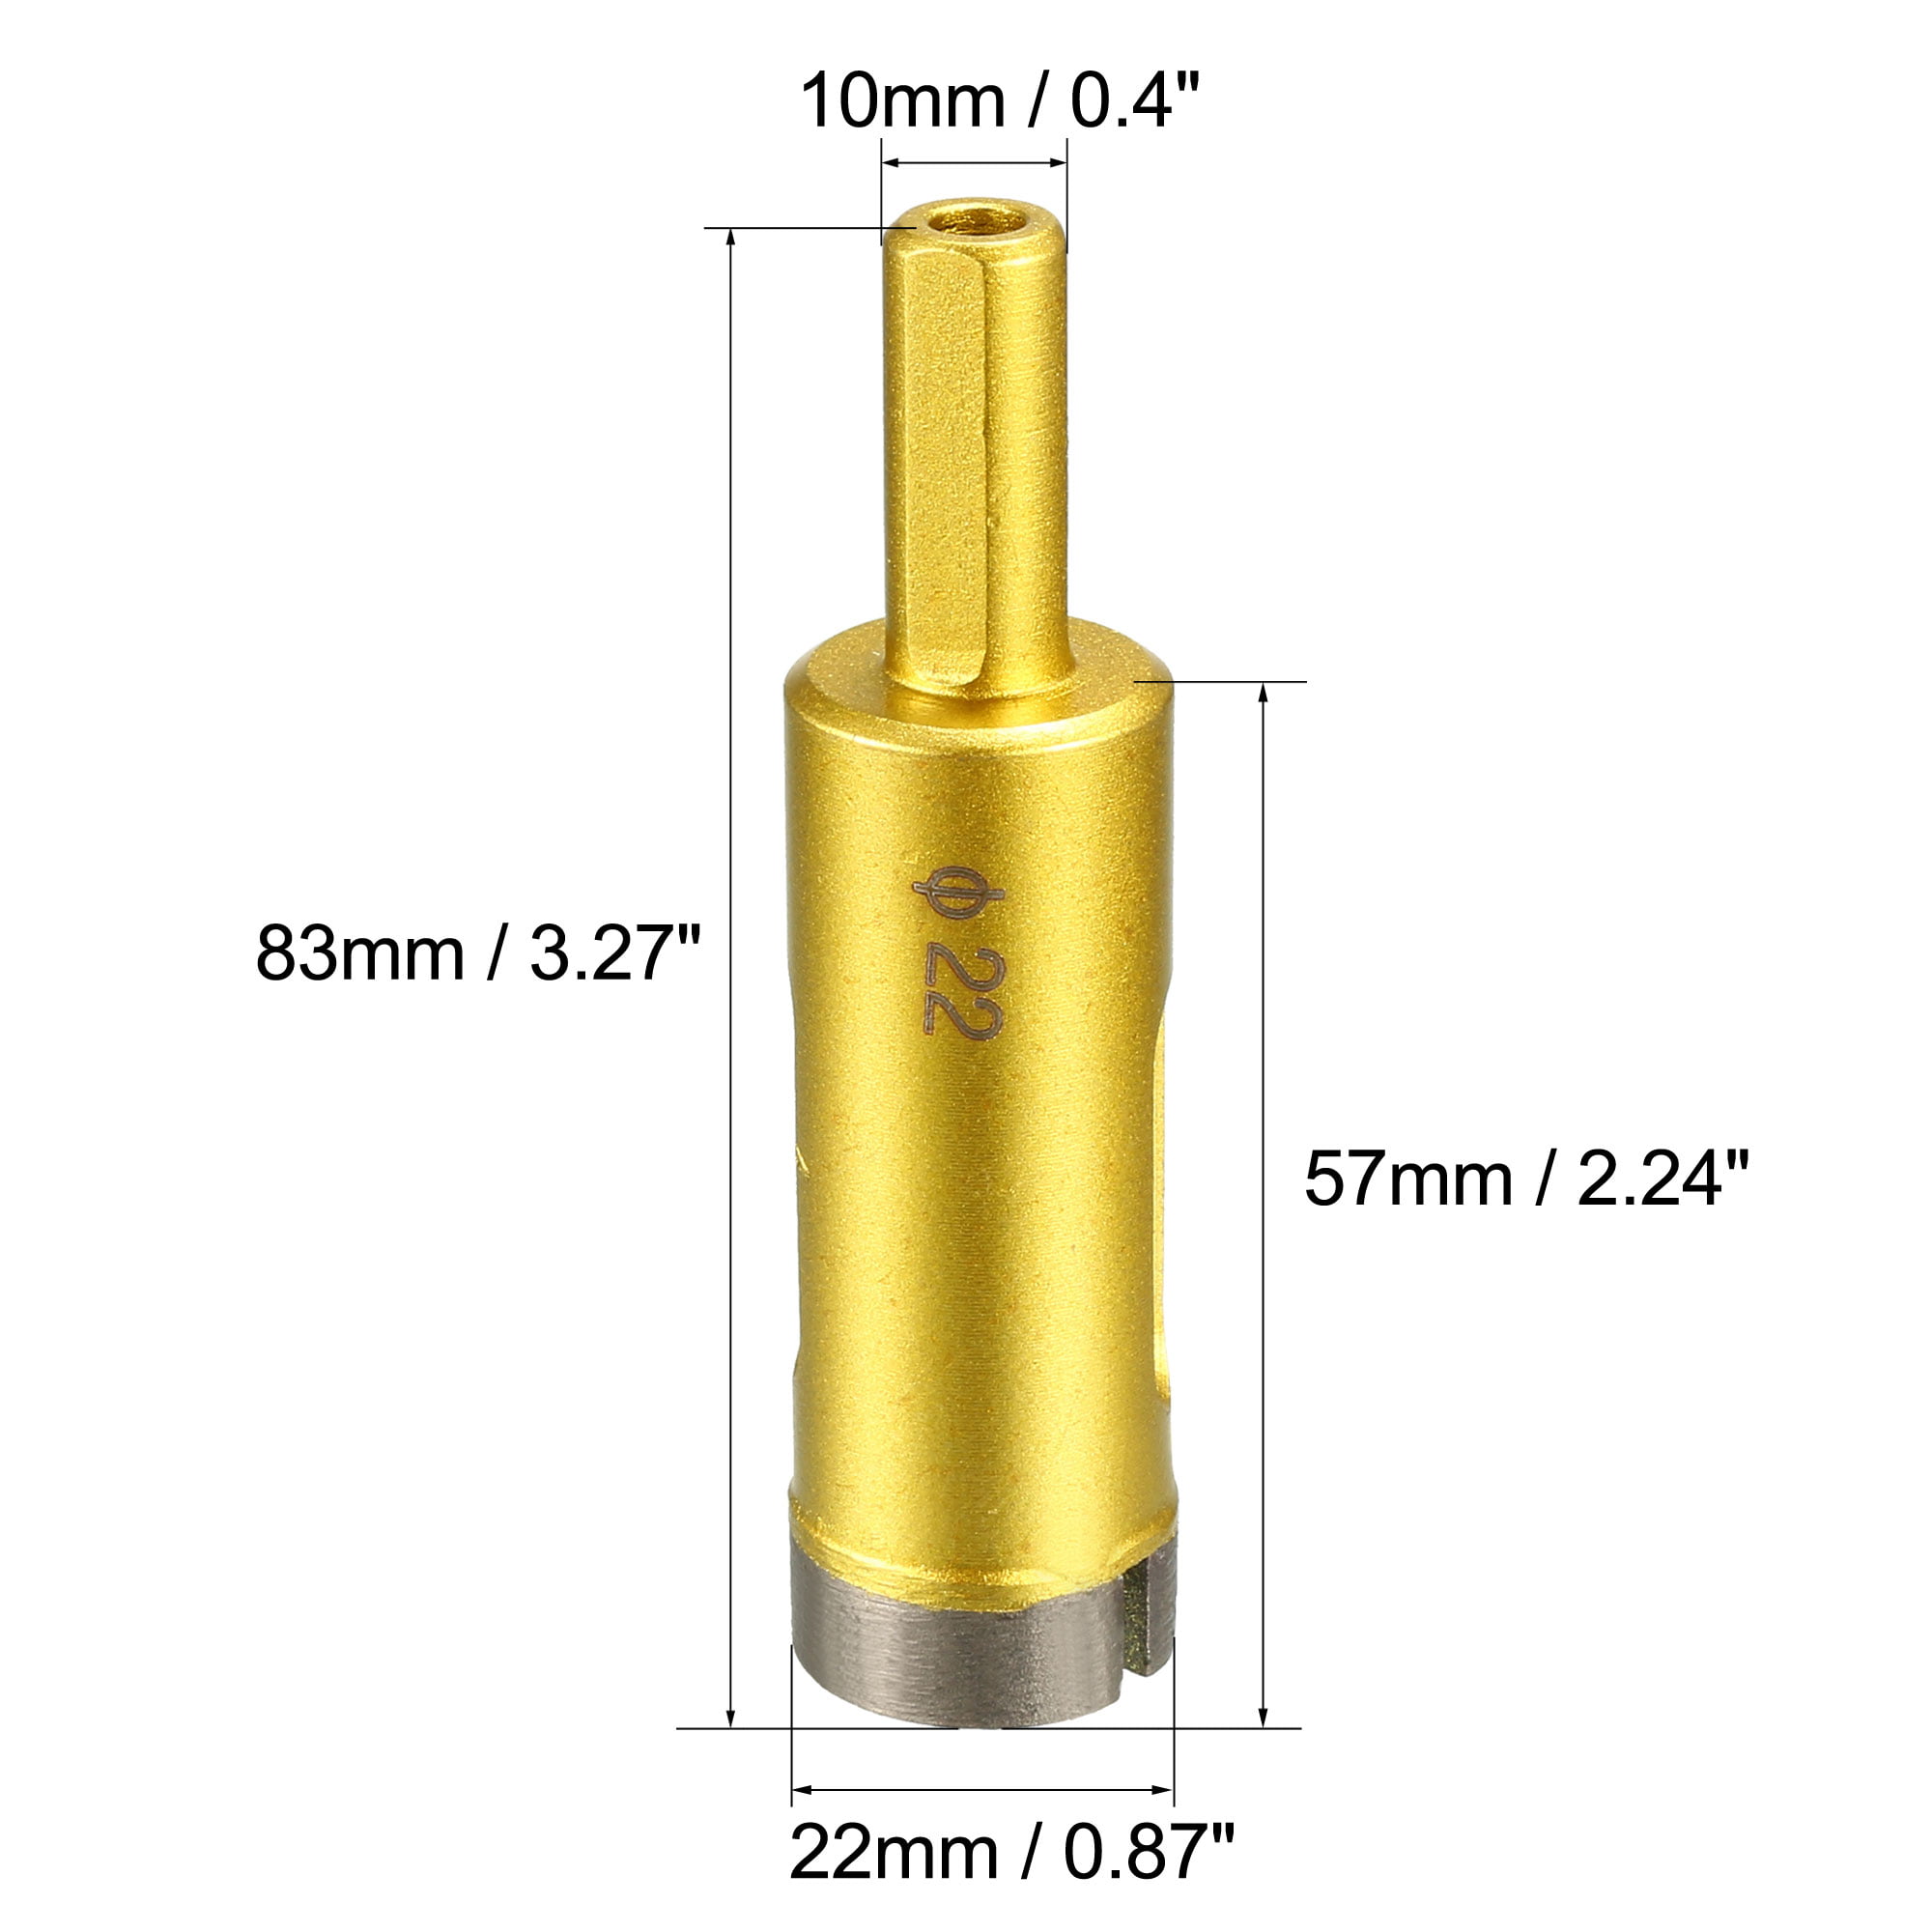 Glass Hole Cutter Golden Drilling Core Bit 3Pcs 50mm Diamond Hole Saw Bench Drill for Artificial Stone Marble Concrete